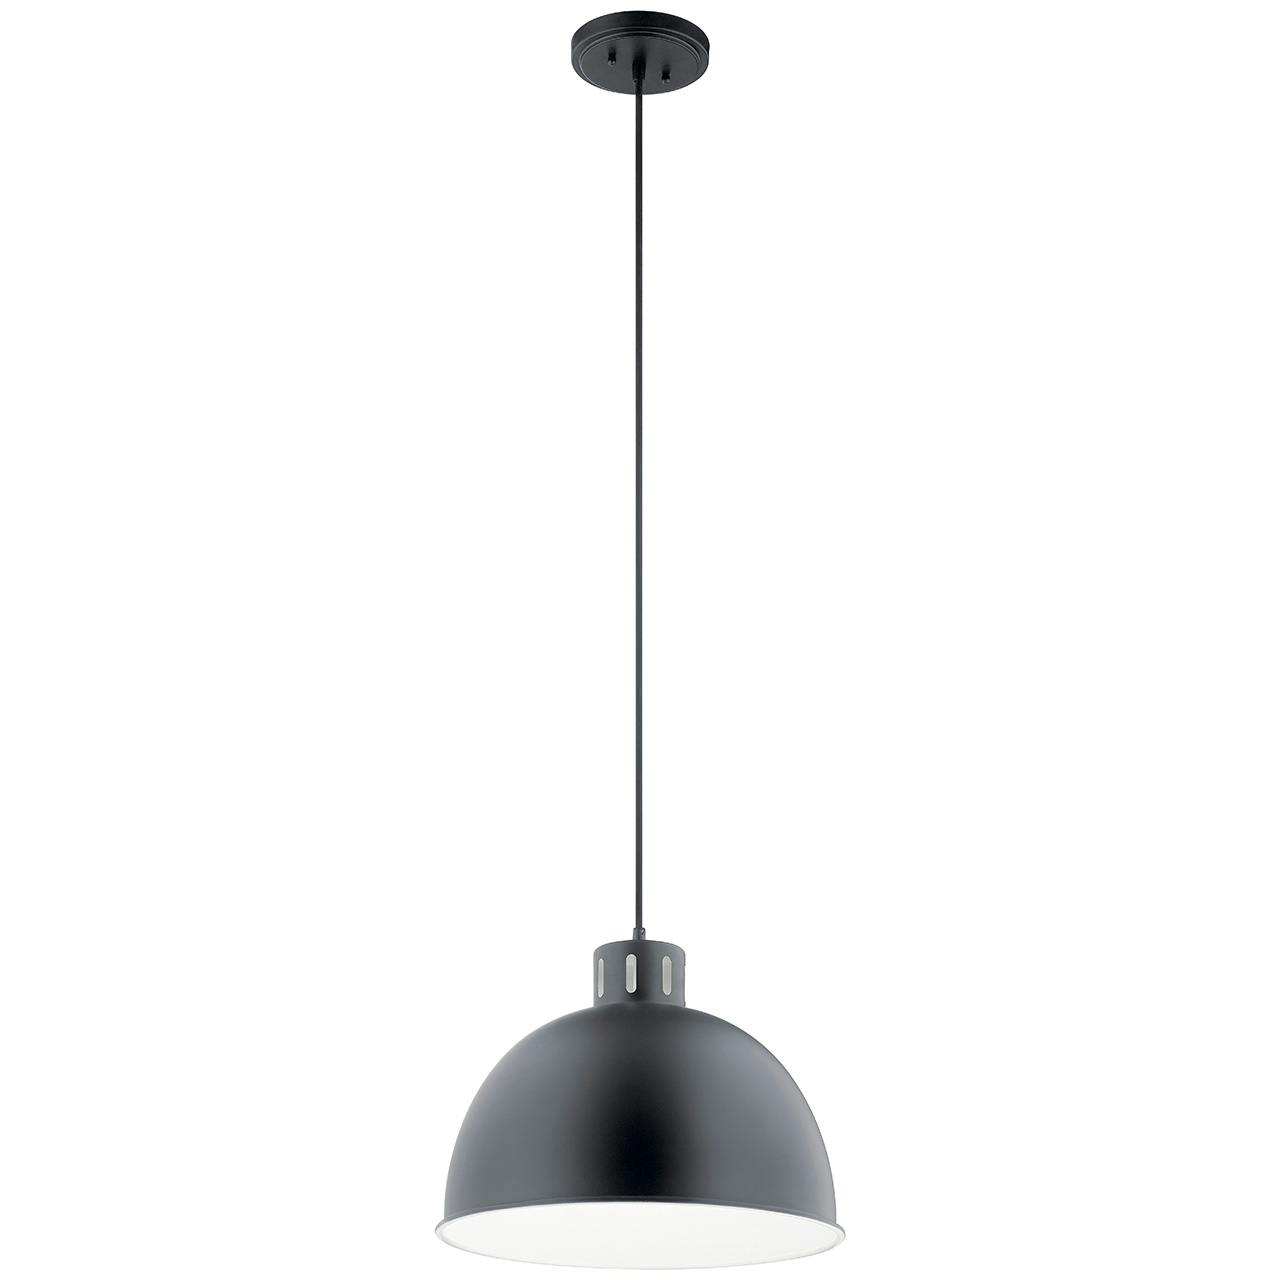 Zailey™ 15.75" 1 Light Pendant in Black on a white background